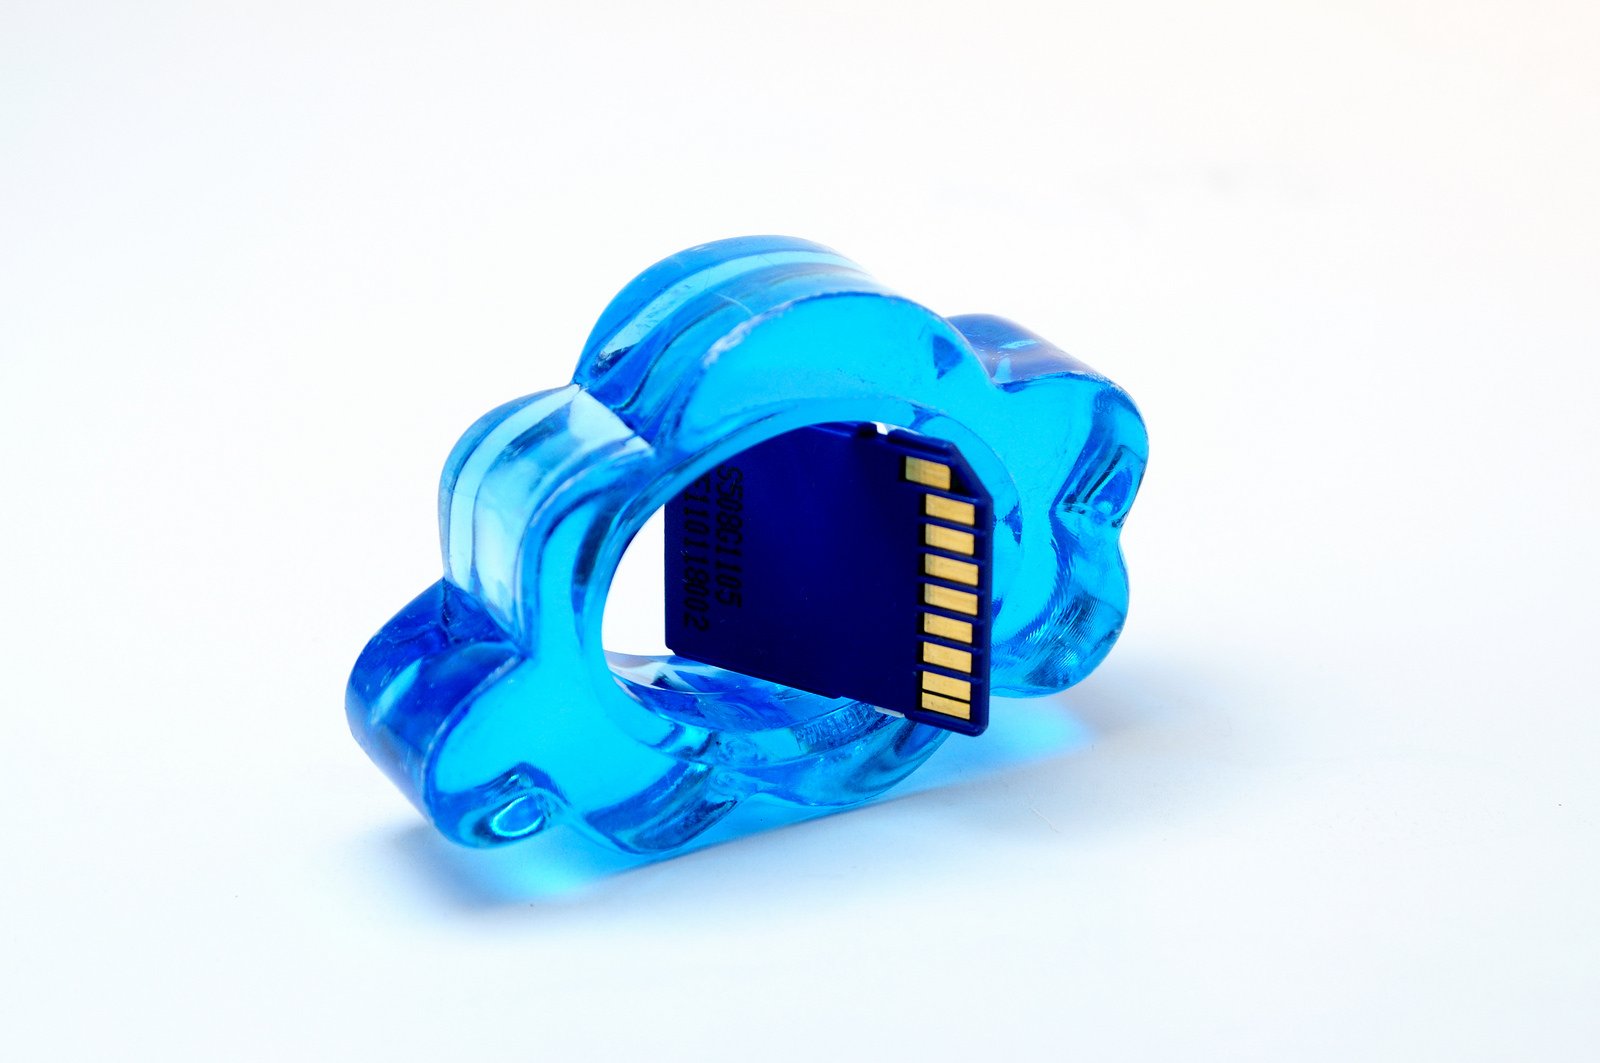 Prevalent concerns that's preventing companies from adopting cloud storage services